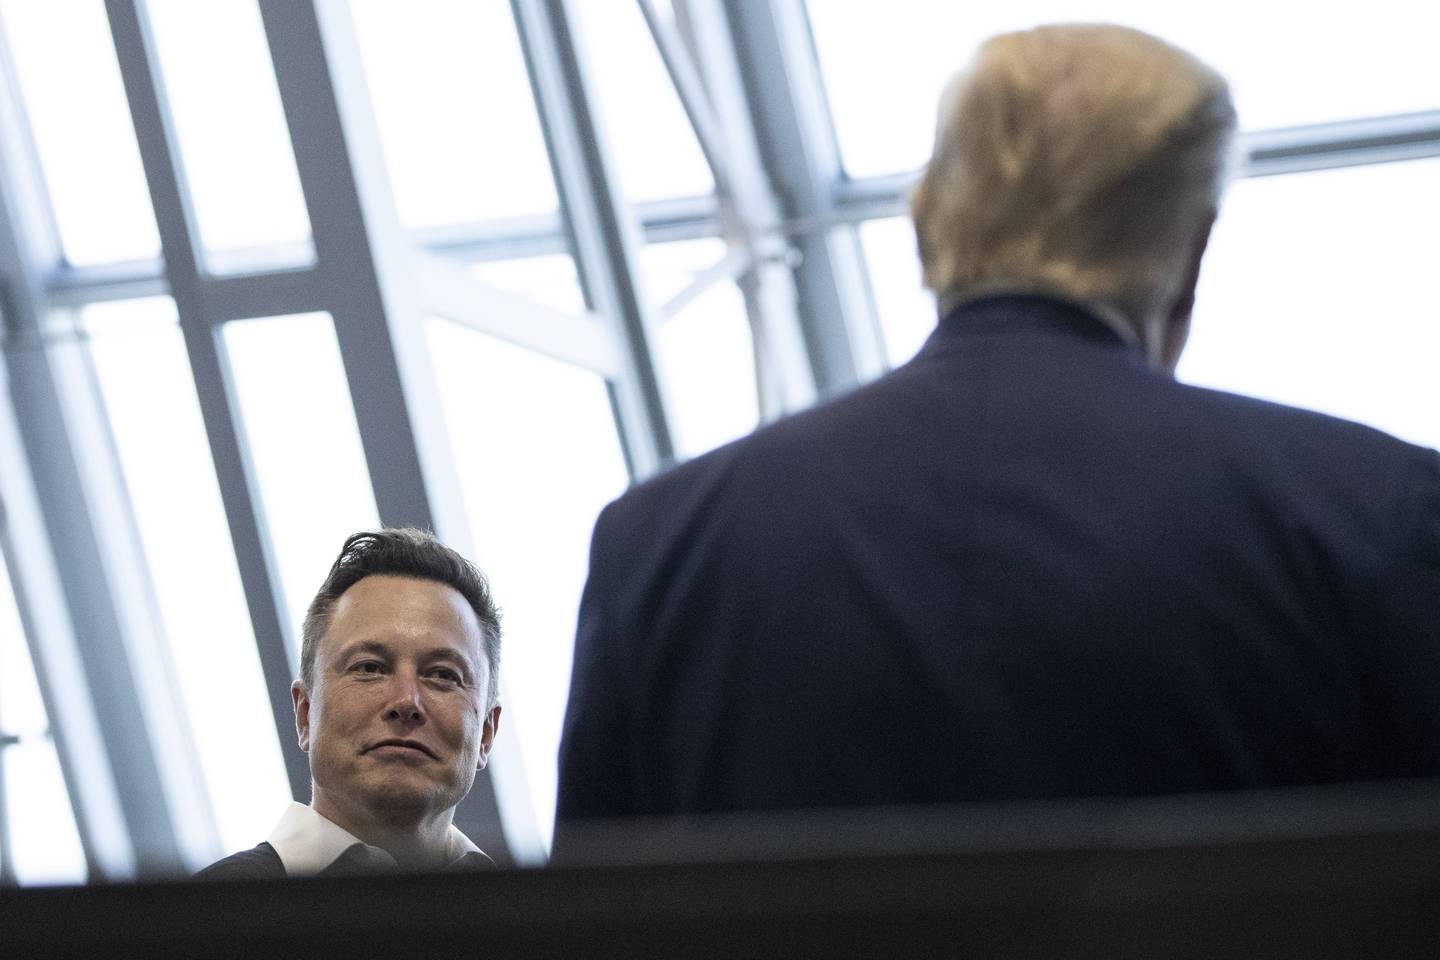 Is the purchase of a new social network coming? Donald Trump confirms the ties and collaborations that unite him with Elon Musk